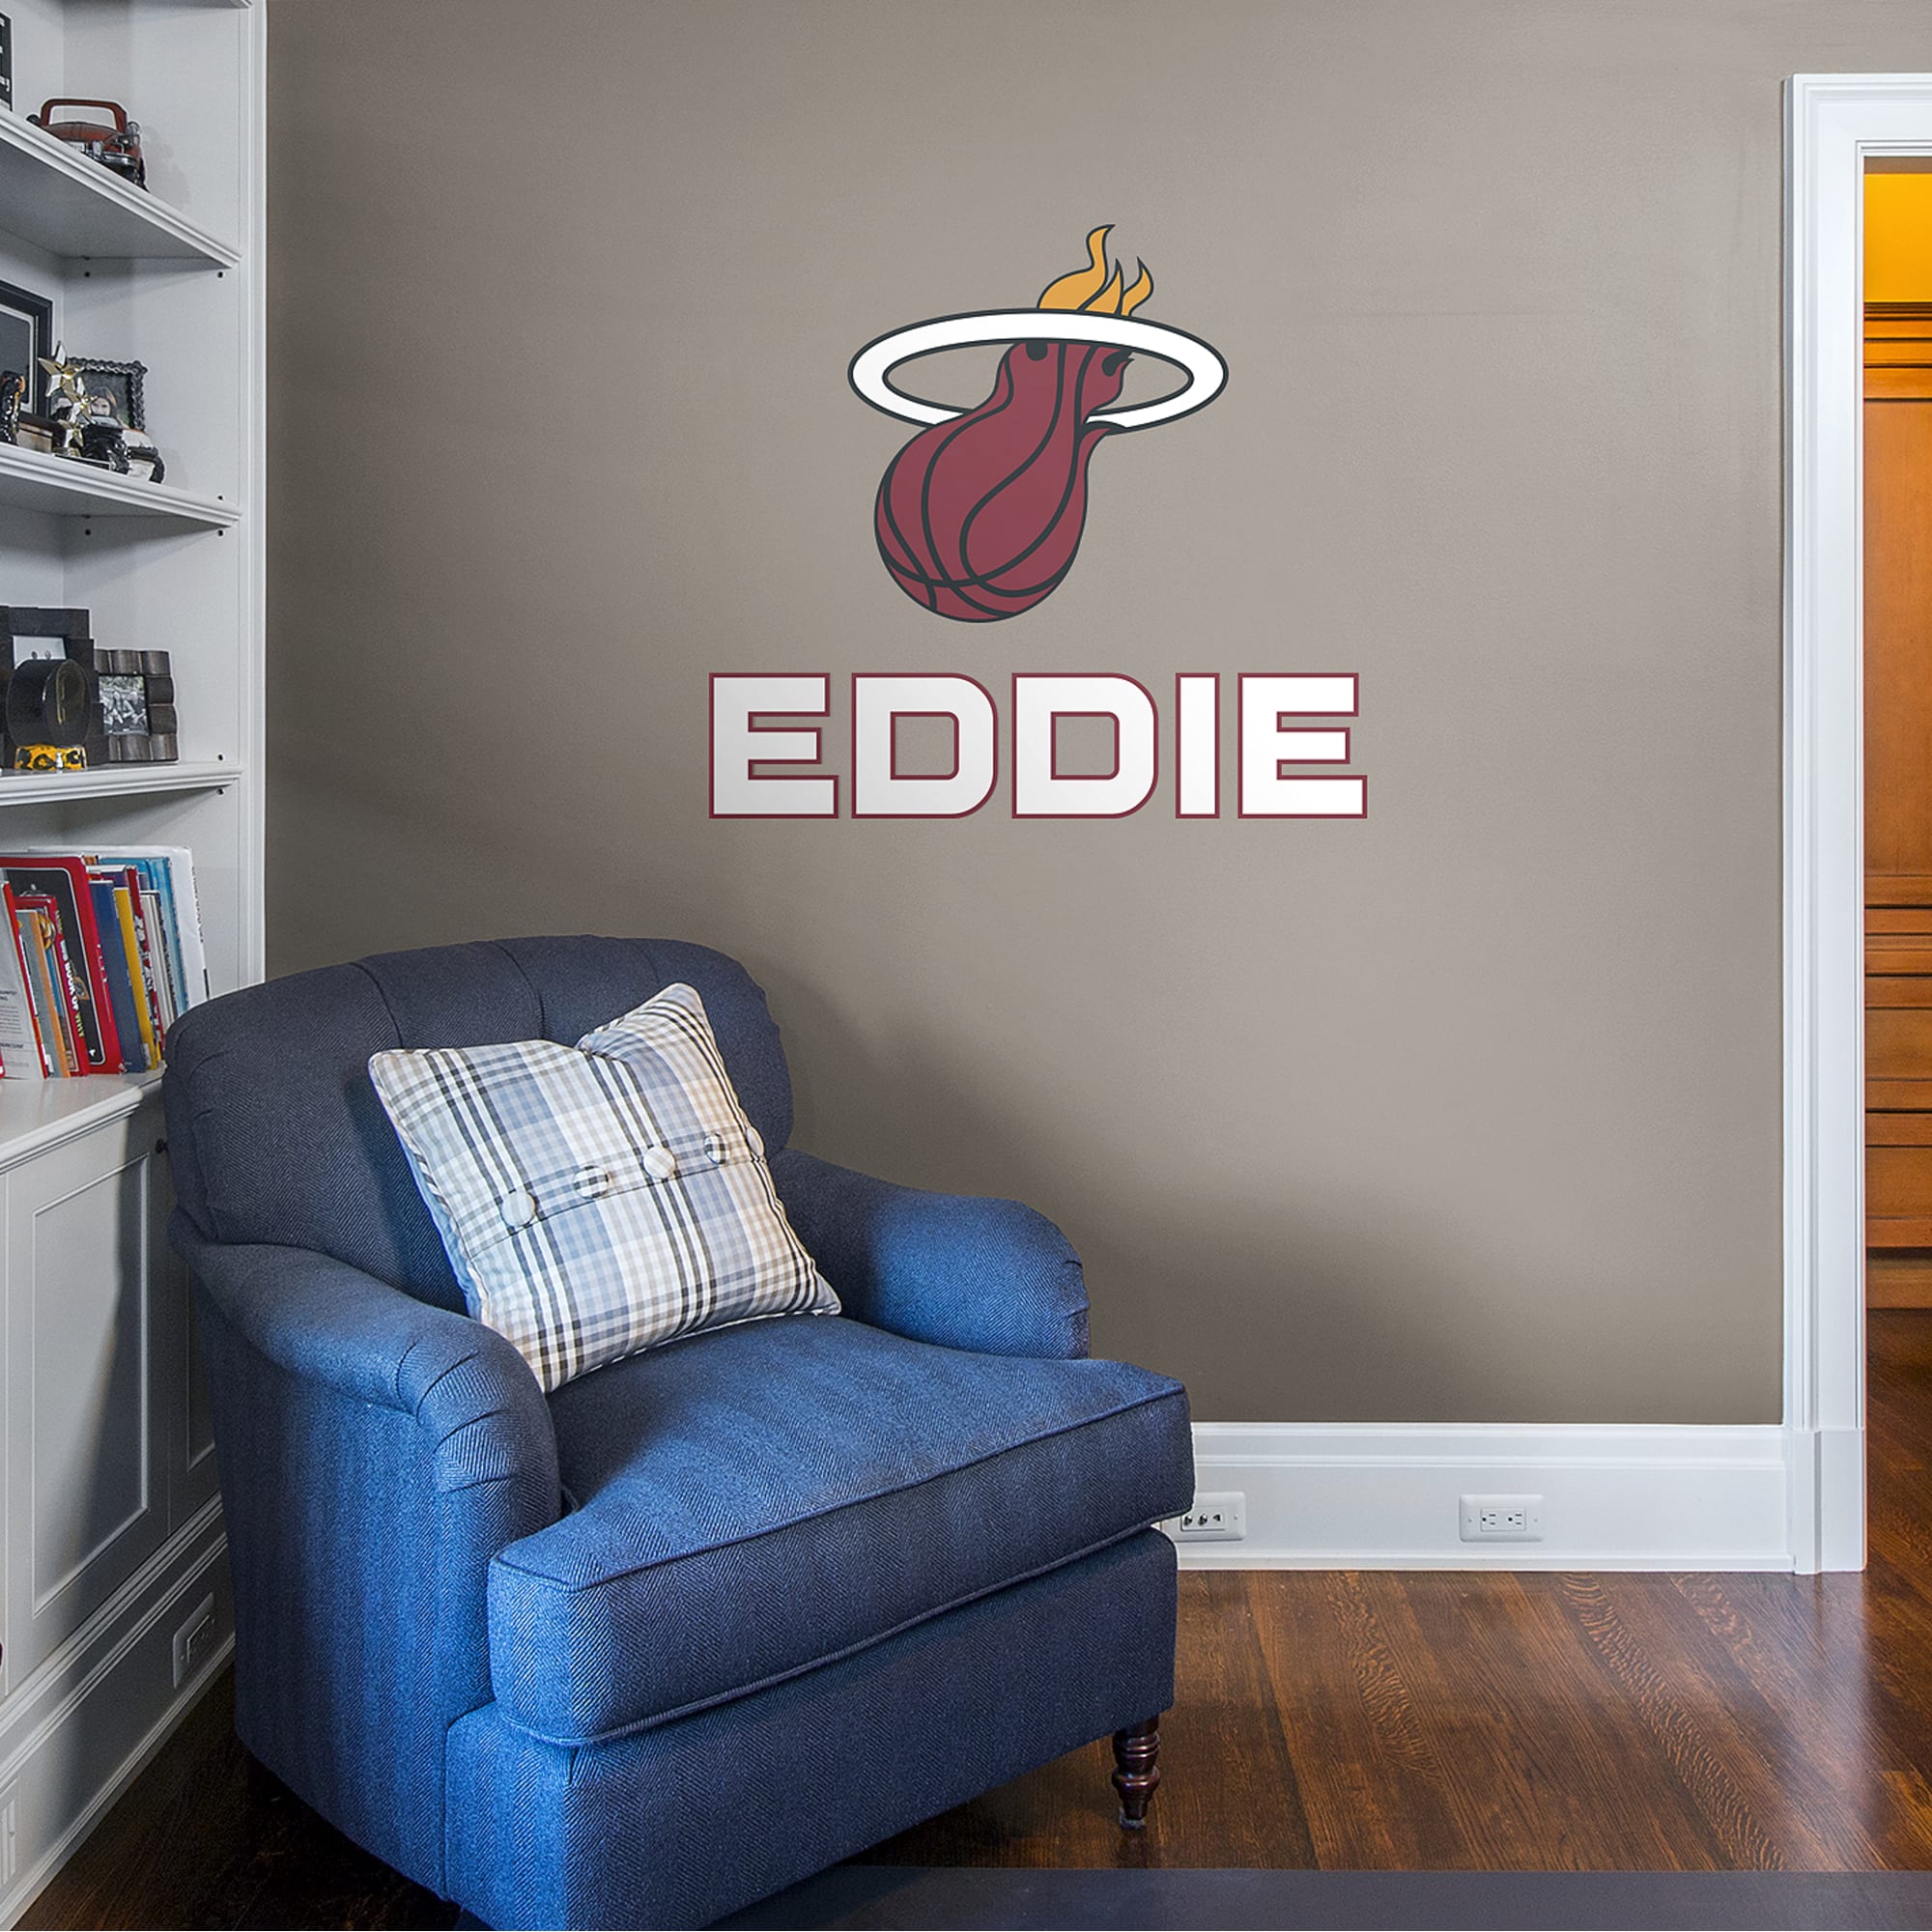 Miami Heat: Stacked Personalized Name - Officially Licensed NBA Transfer Decal in White (52"W x 39.5"H) by Fathead | Vinyl